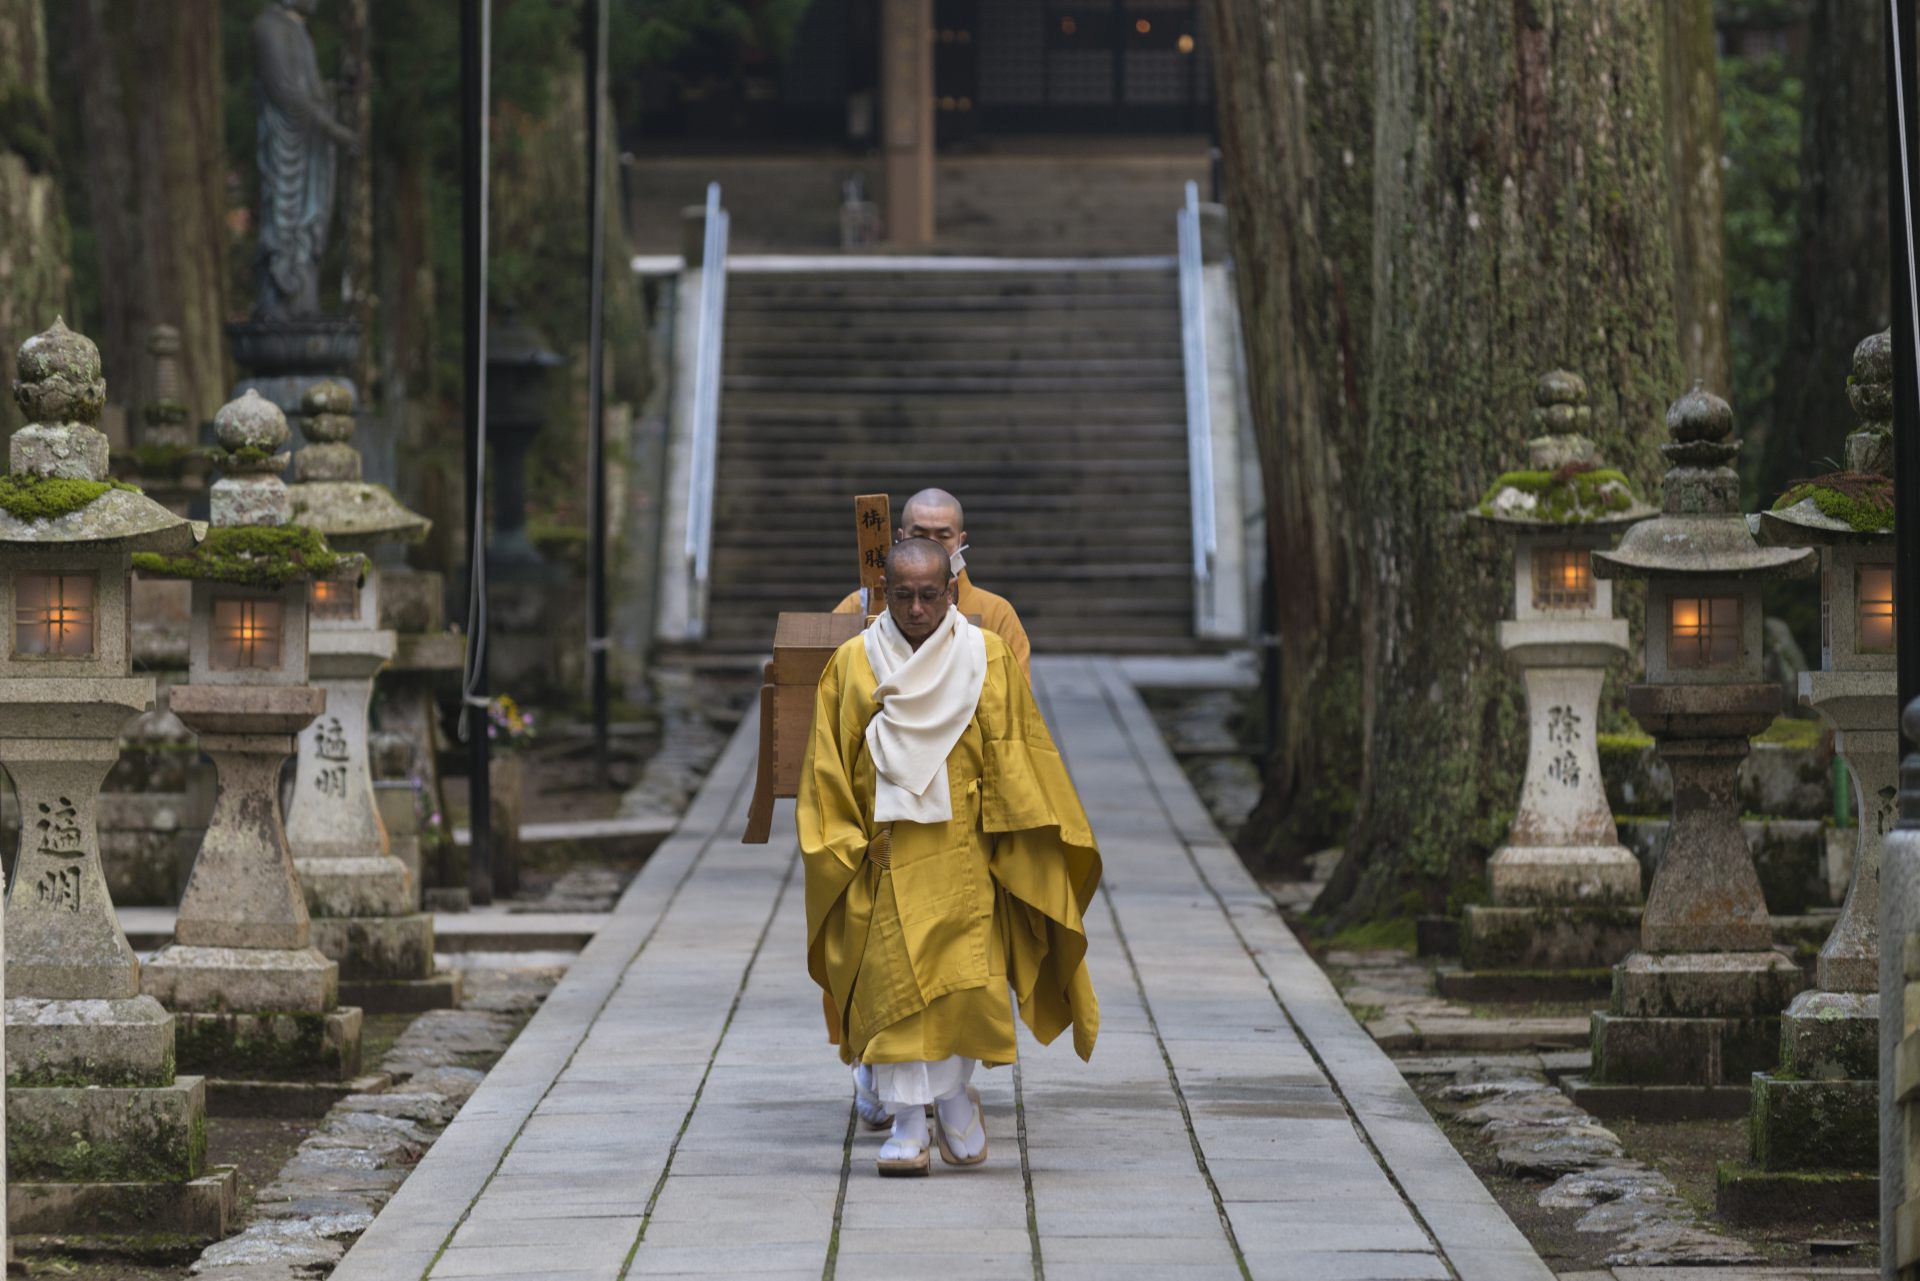 1,200 years after the Great Priest Kukai entered eternal meditation here, the custom of shoshingu ceremony, in which symbolic meals are served twice a day to the mausoleum is still performed. 